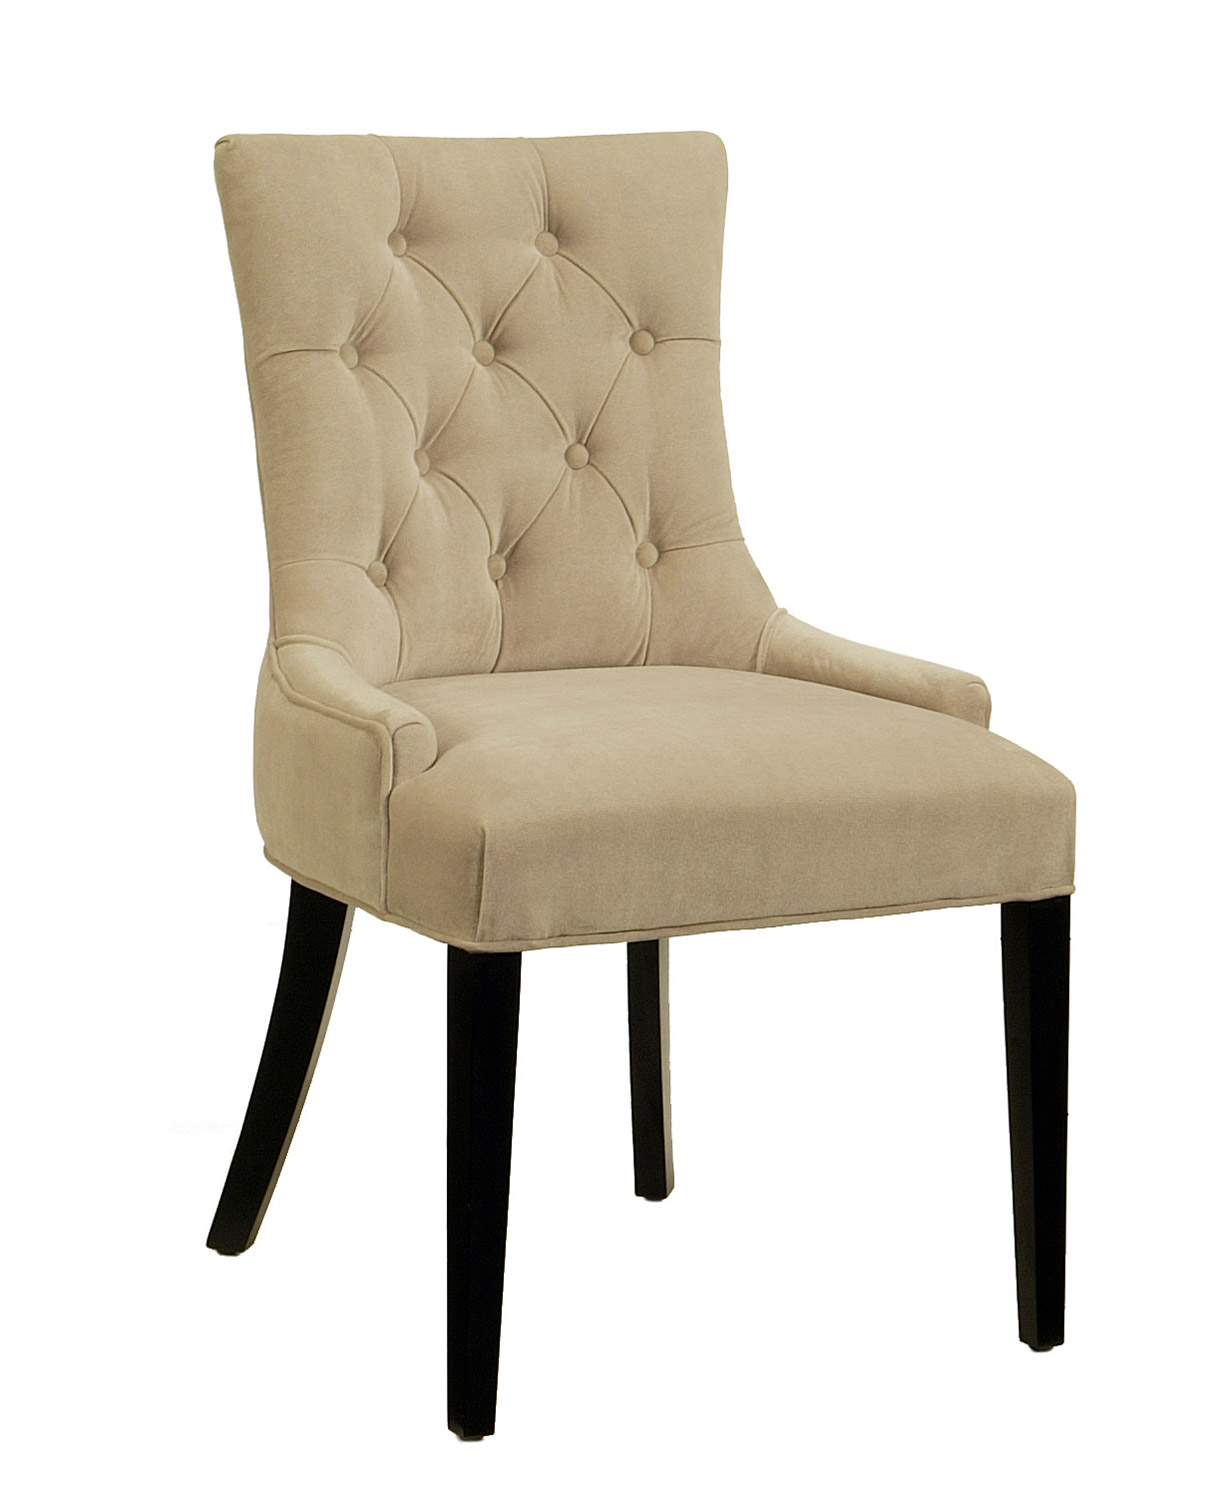 Abbyson Living Franklin Cream Microsuede Tufted Dining Chair